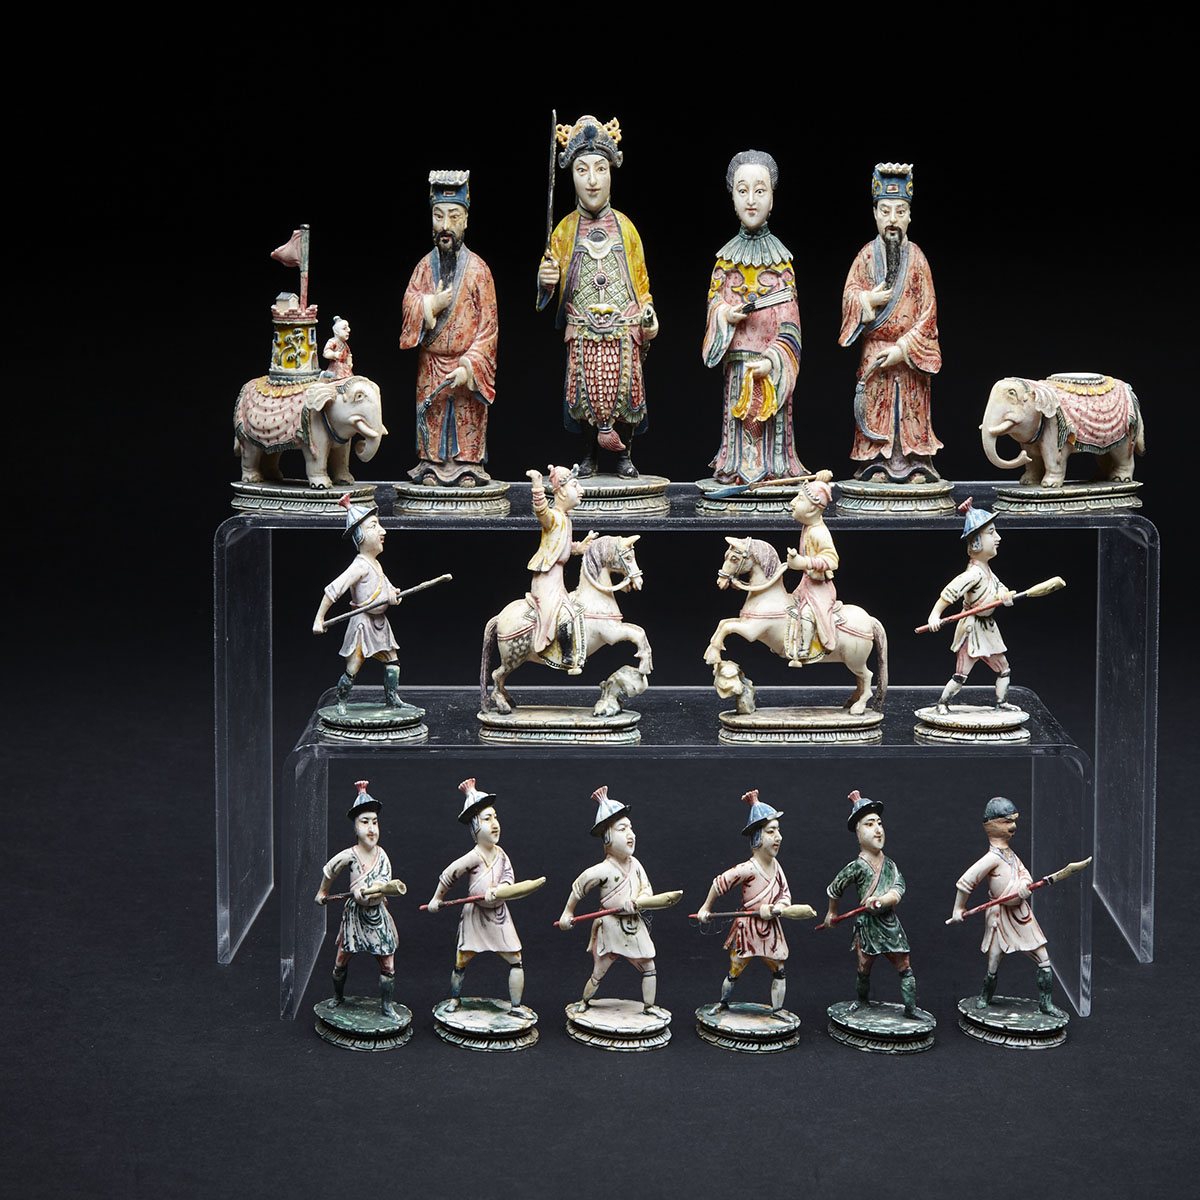 Chinese Carved and Polychromed ivory Figural Half Chess Set, early-mid 19th century